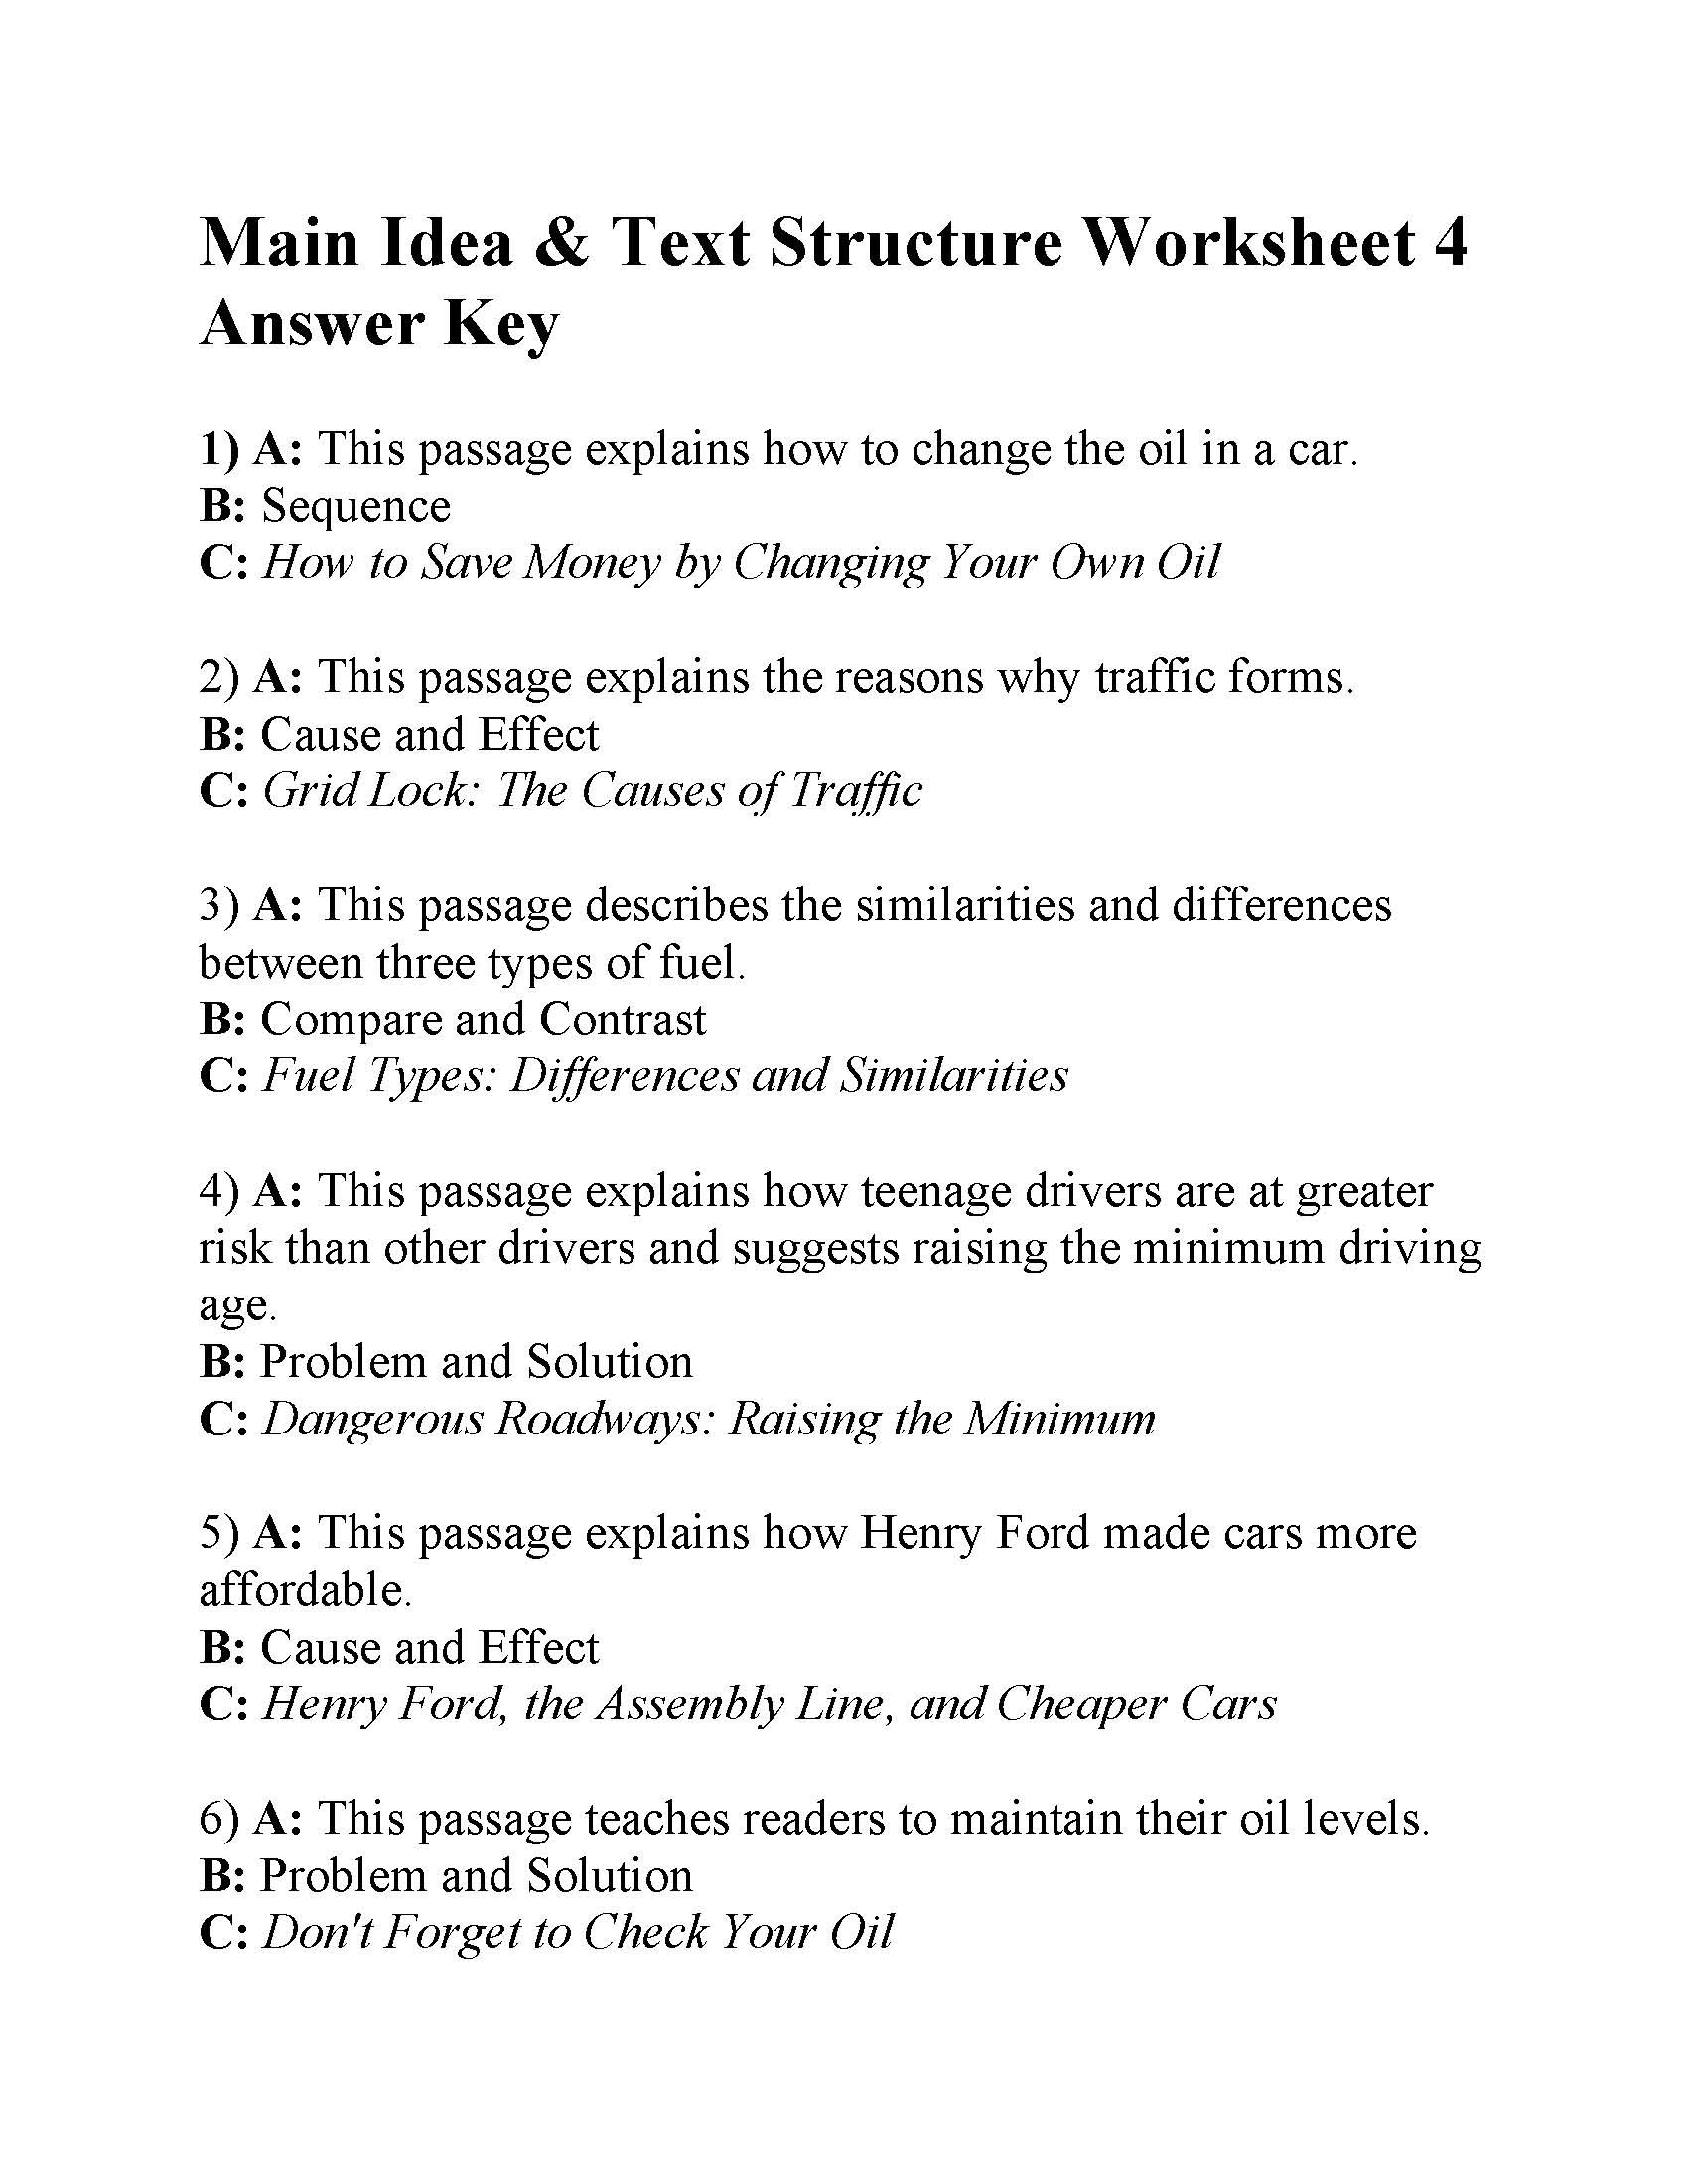 Text Structure Worksheets Grade 4 Main Idea and Text Structure Worksheet 4